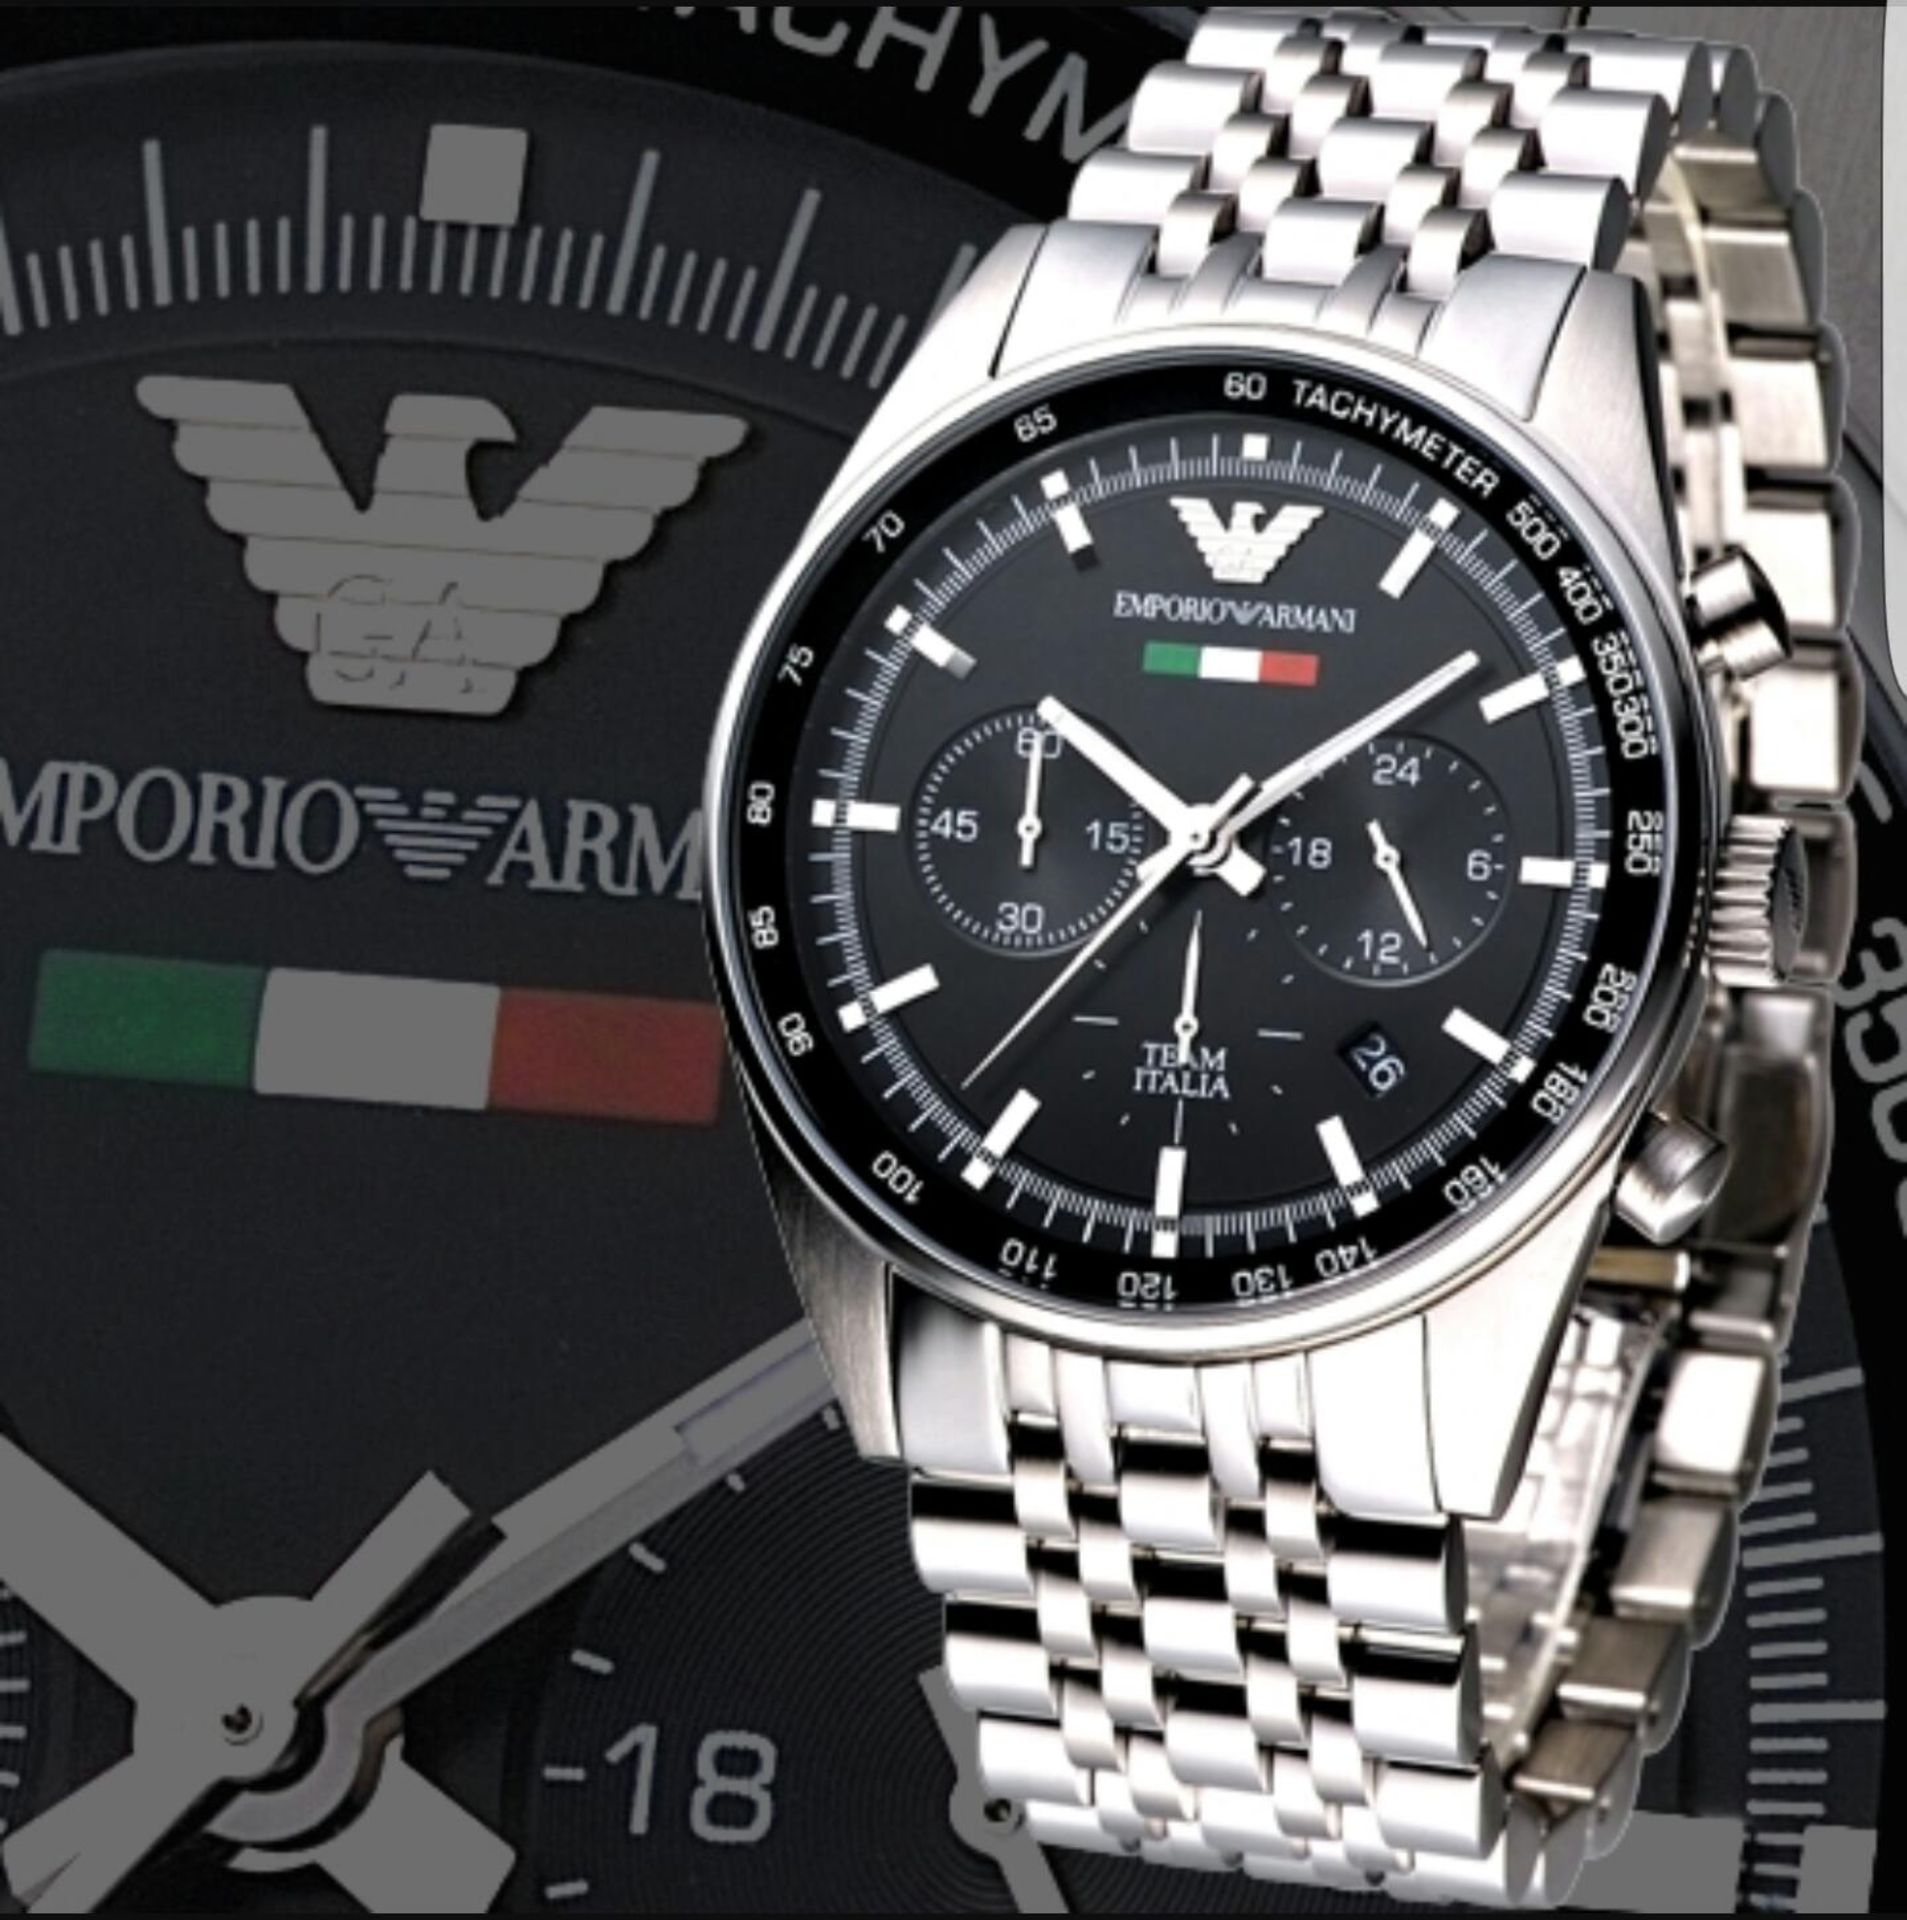 BRAND NEW GENTS EMPORIO ARMANI WATCH AR5983, COMPLETE WITH ORIGINAL PACKAGING AND MANUAL - FREE